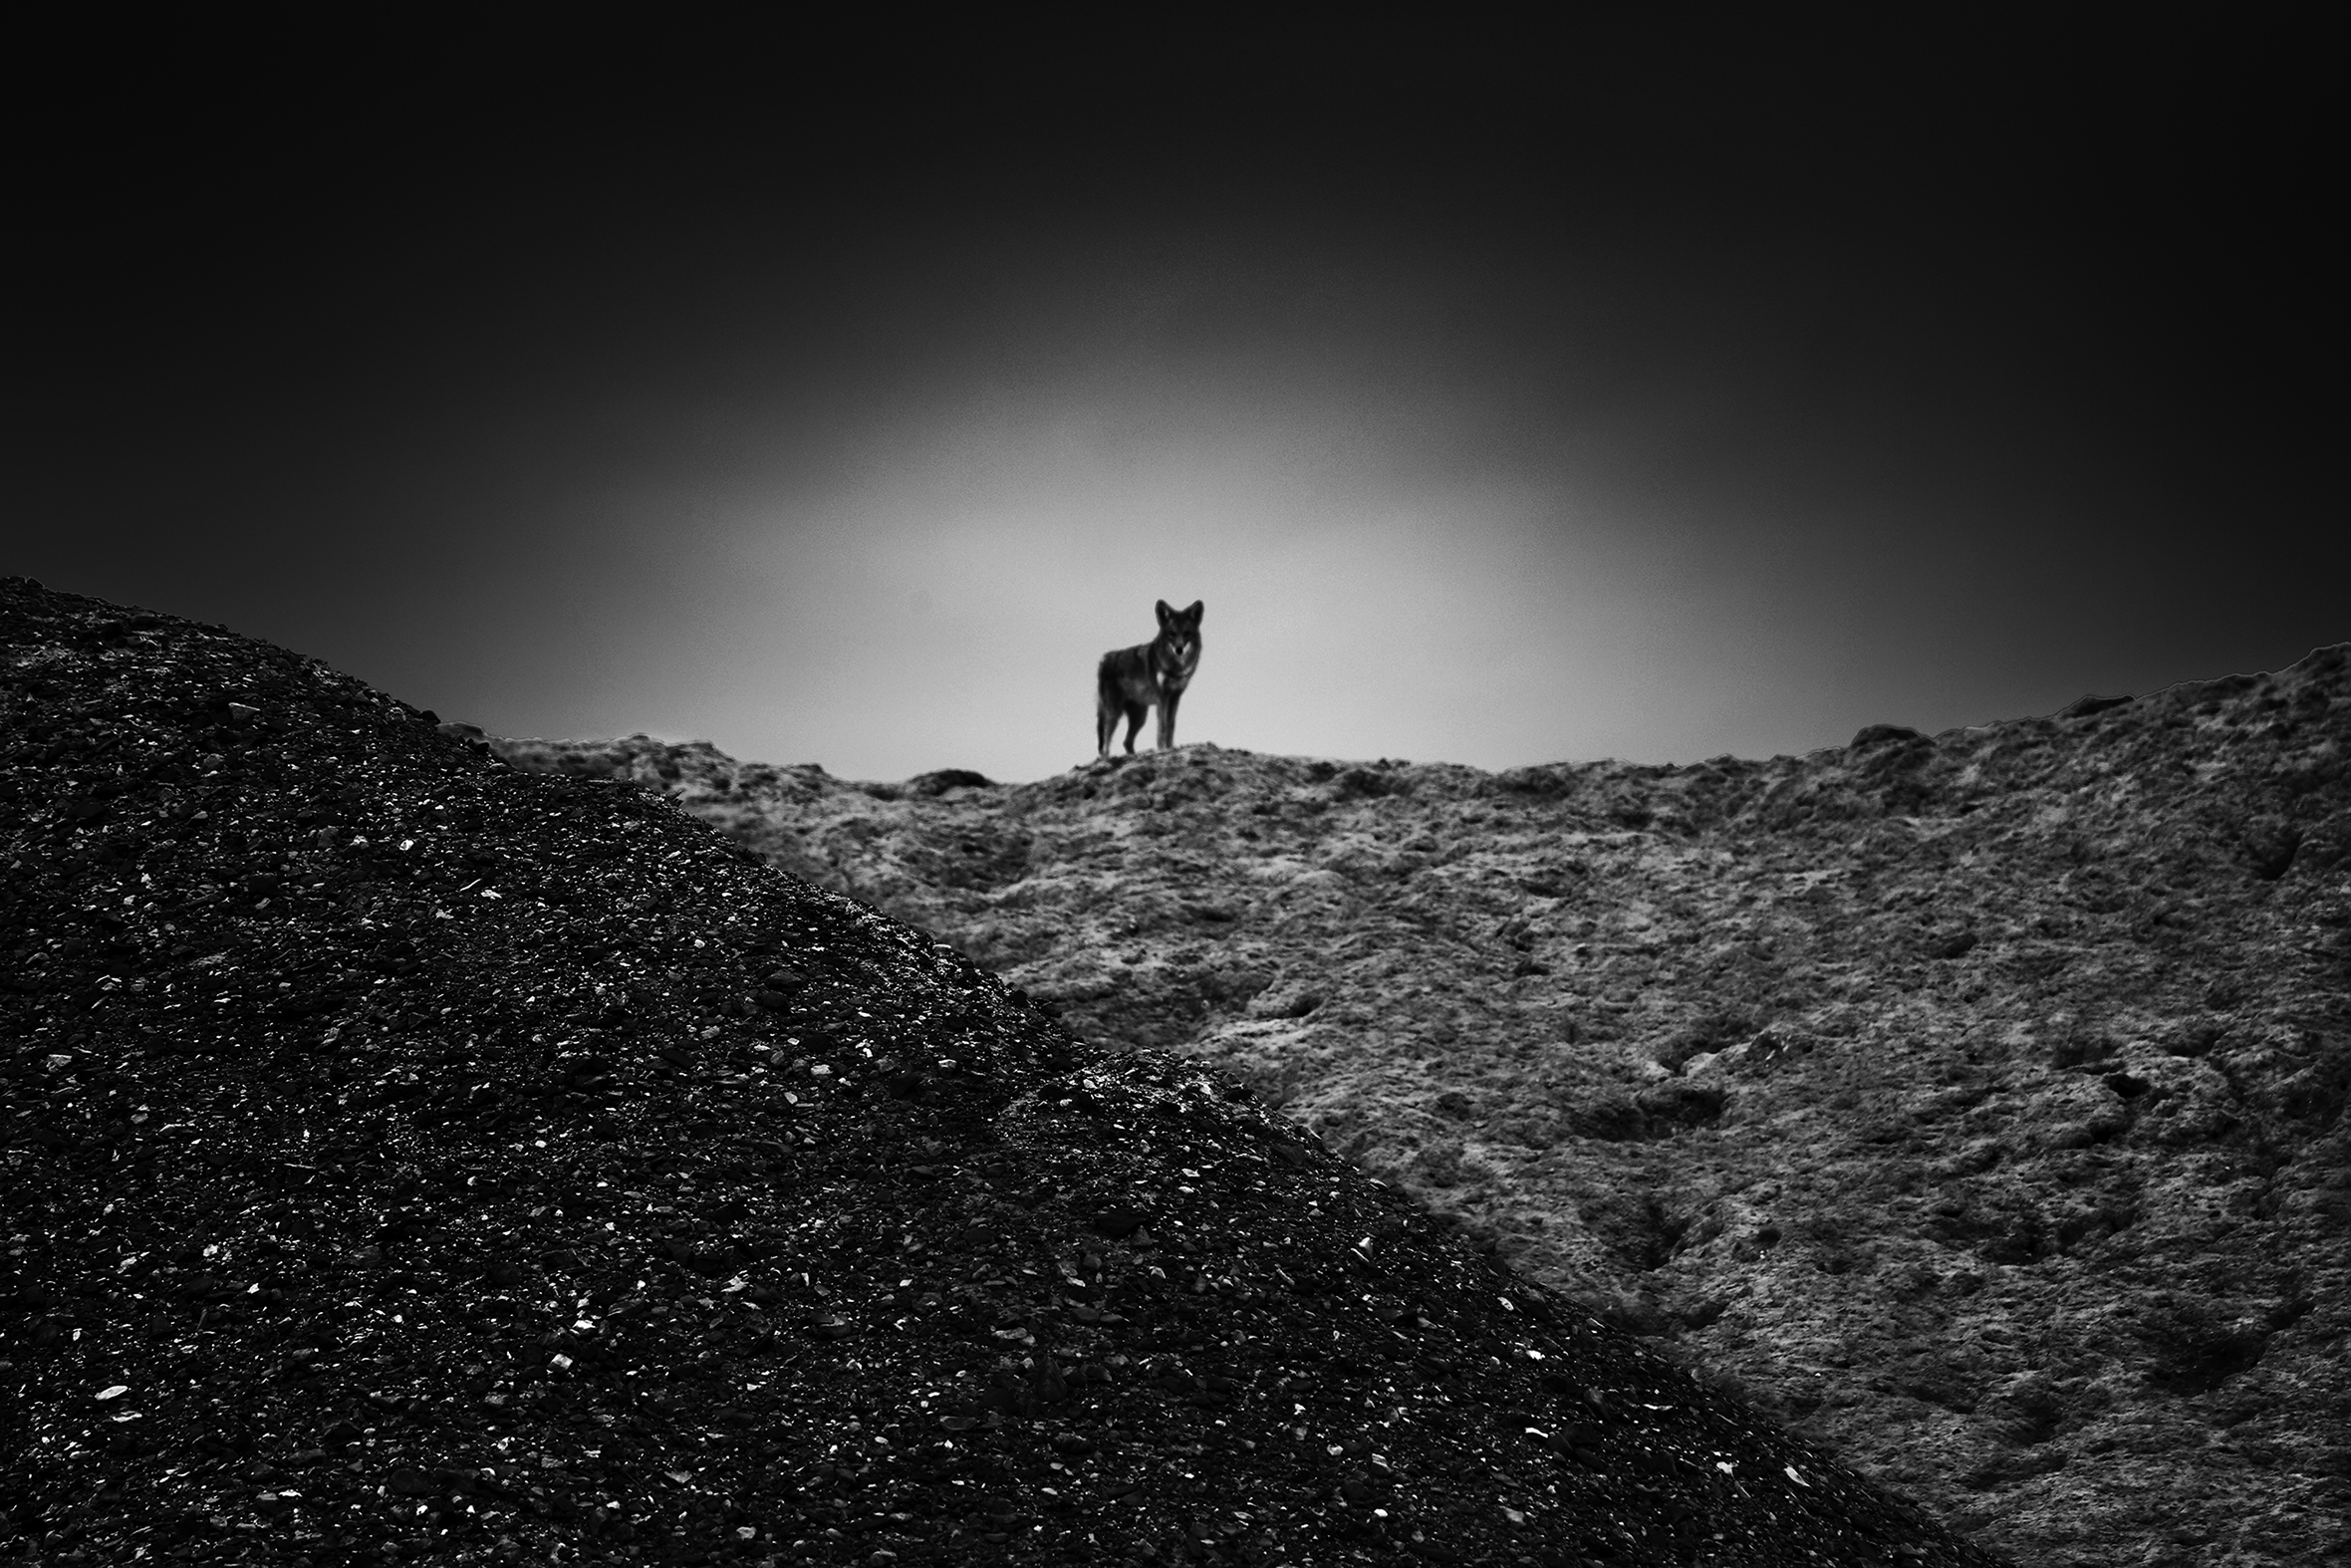 A coyote watches from atop a hill.